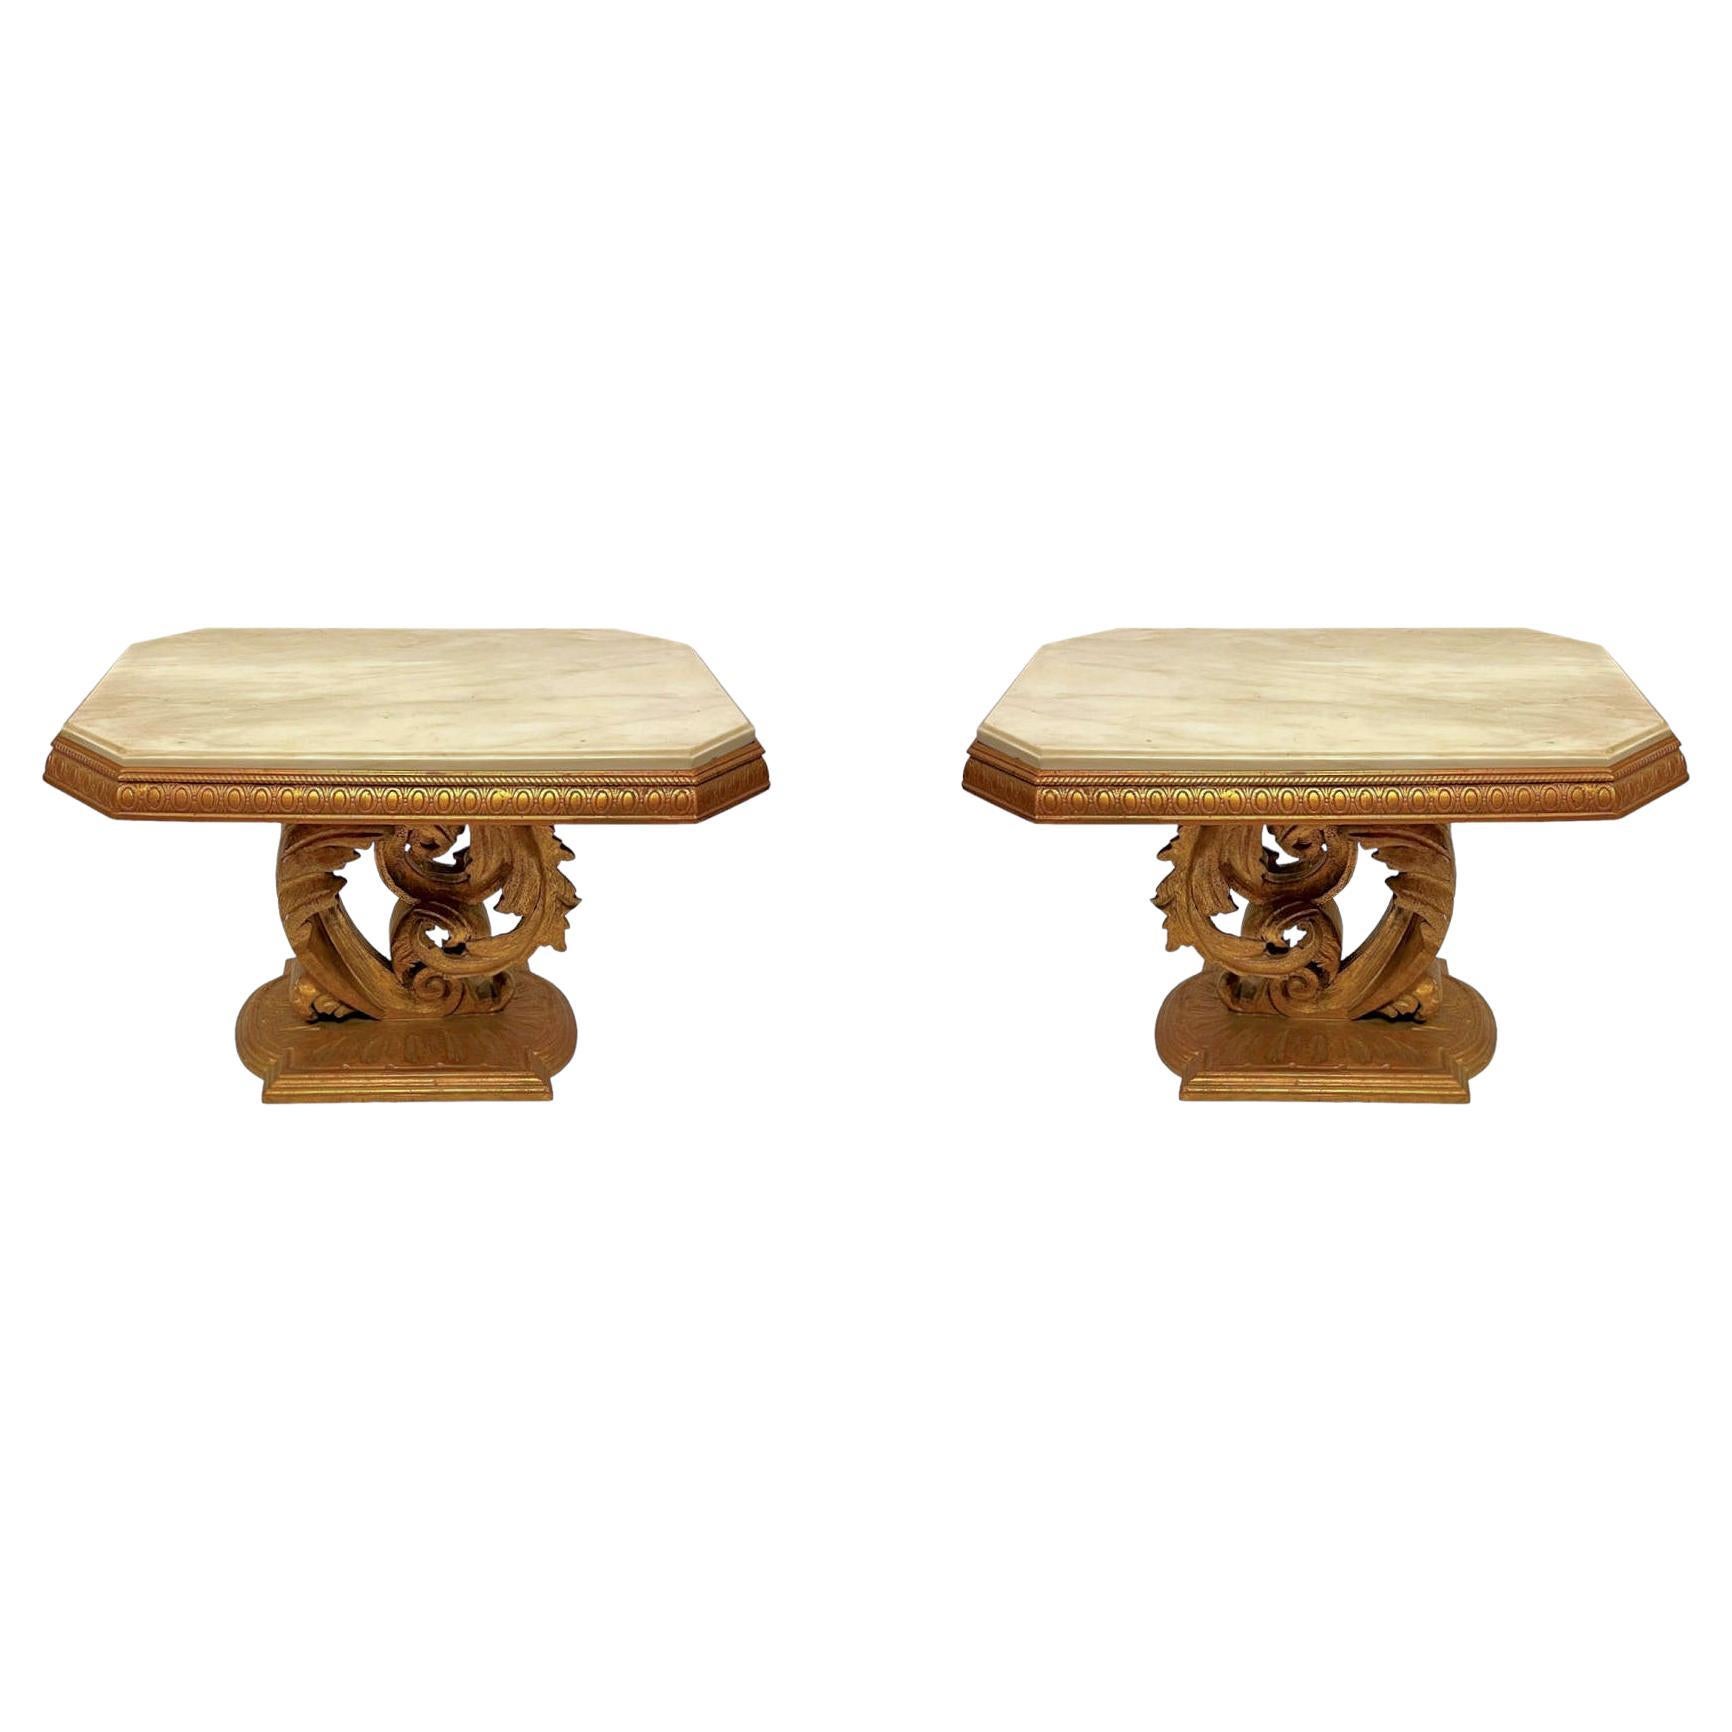 Pair Roccoco Style Carved Giltwood Pedestal Side Tables with White Marble Tops For Sale